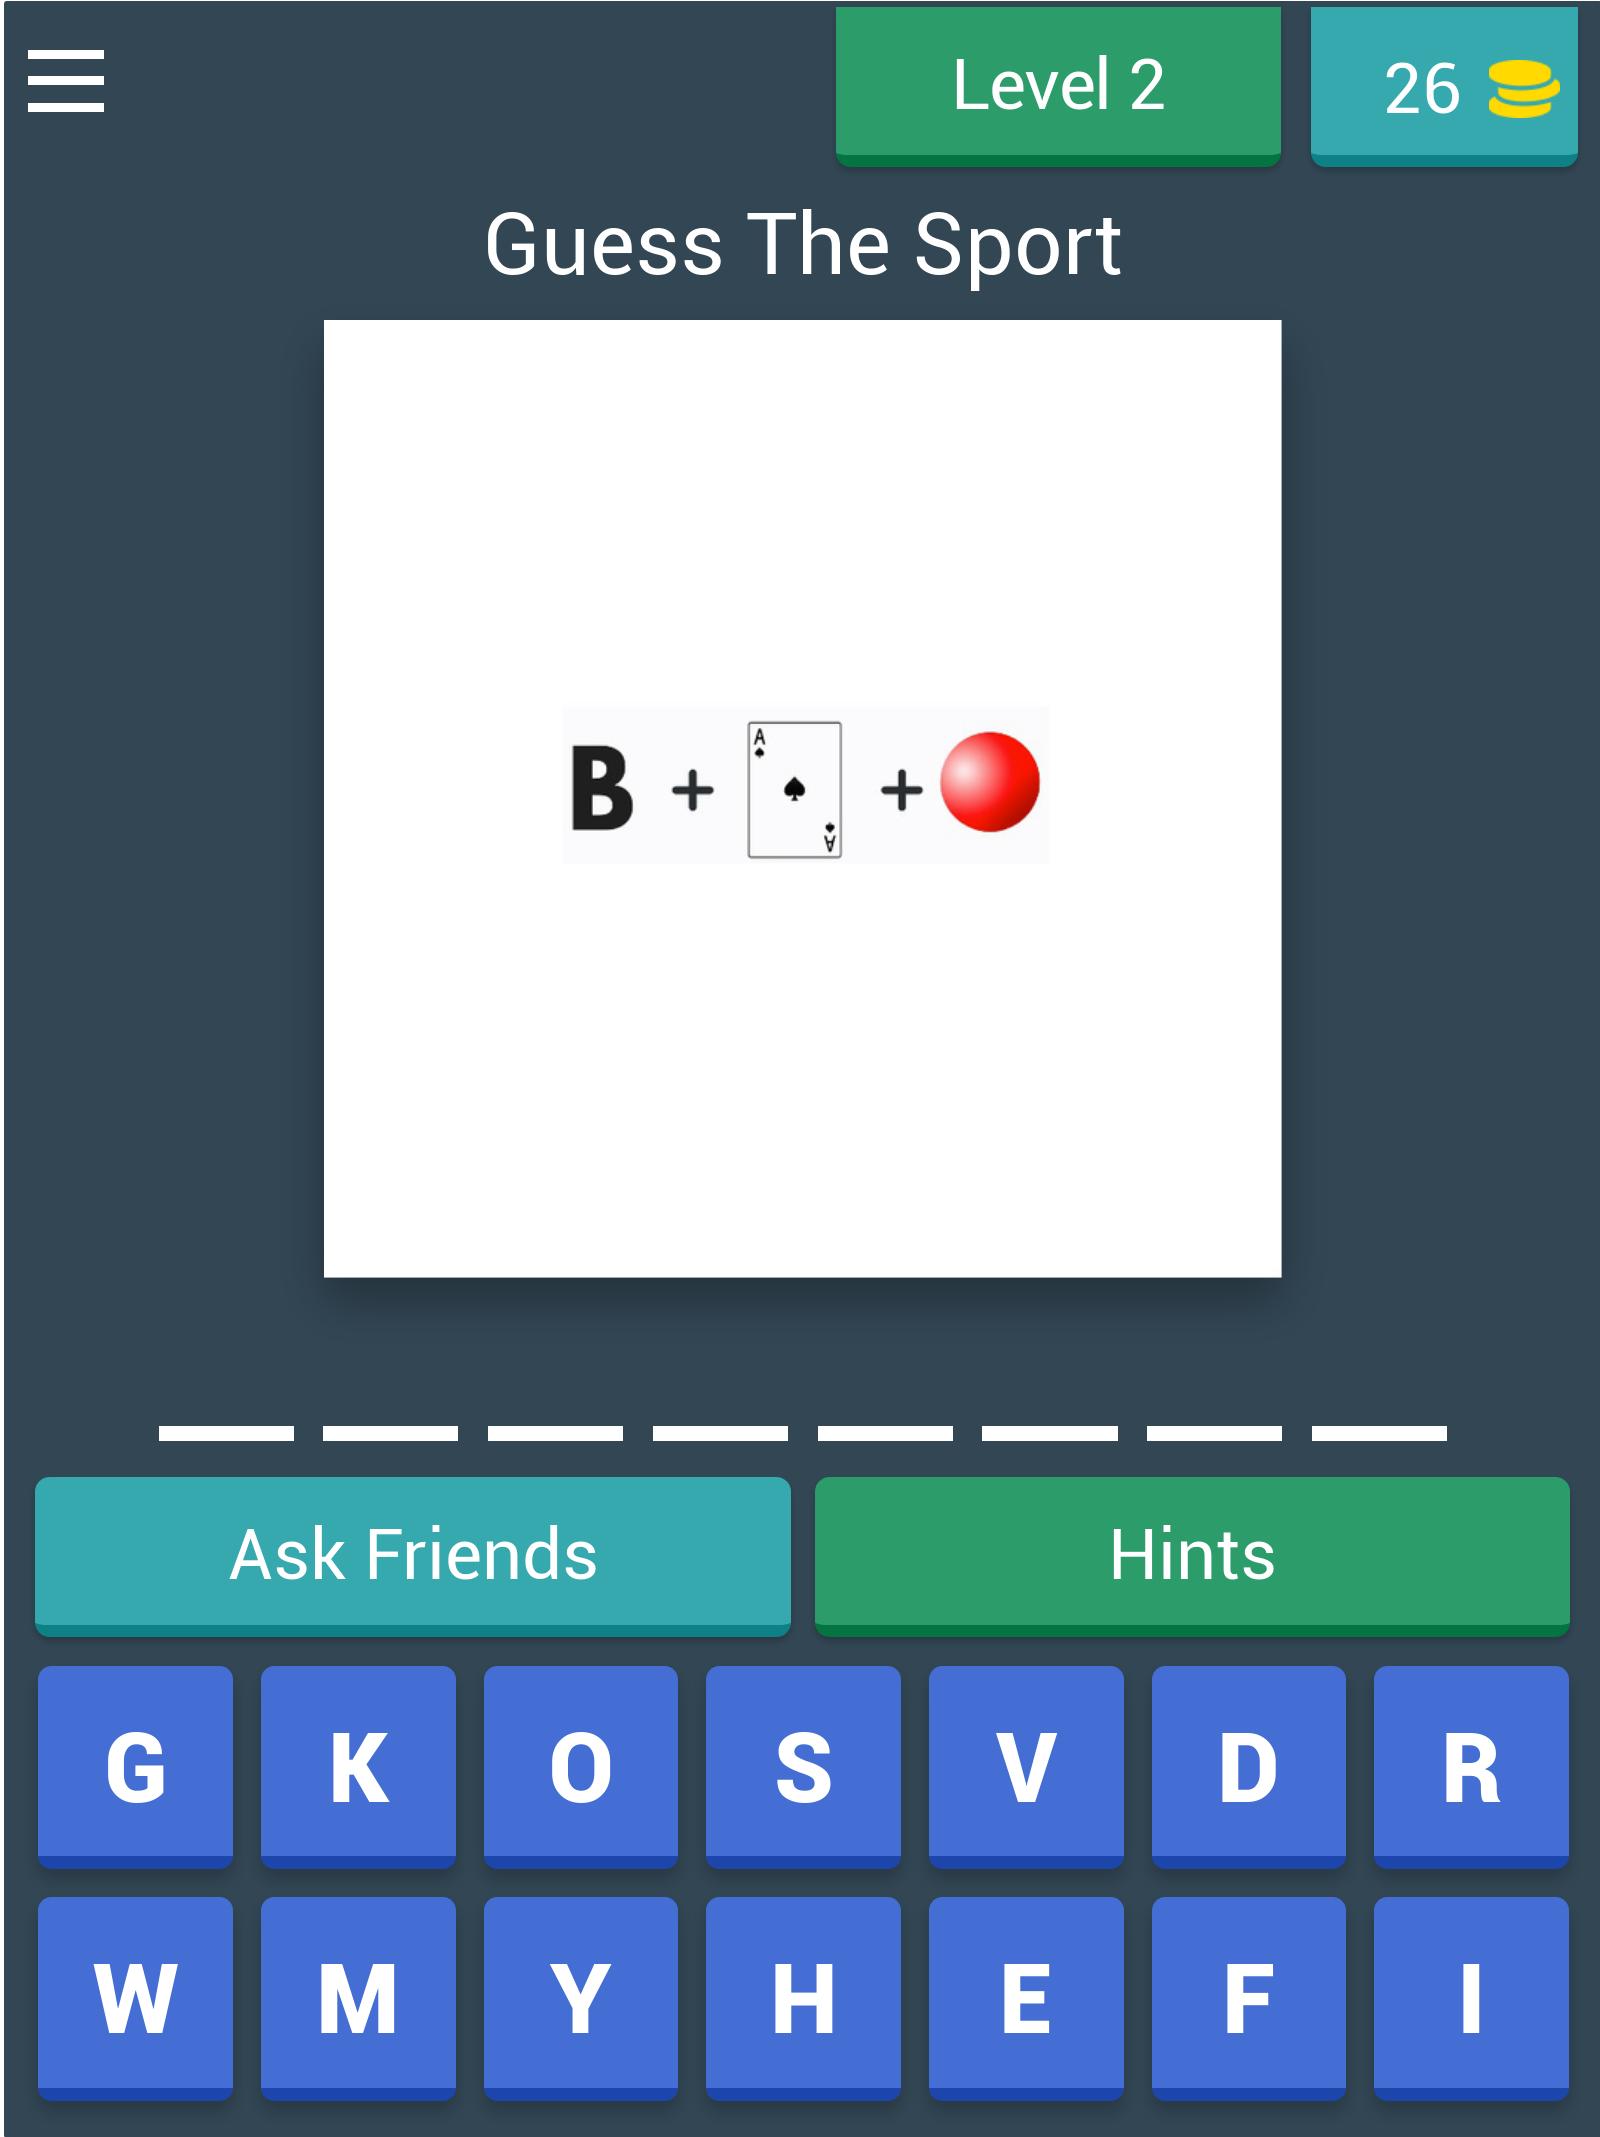 Guess The Sport By Emoji for Android - APK Download